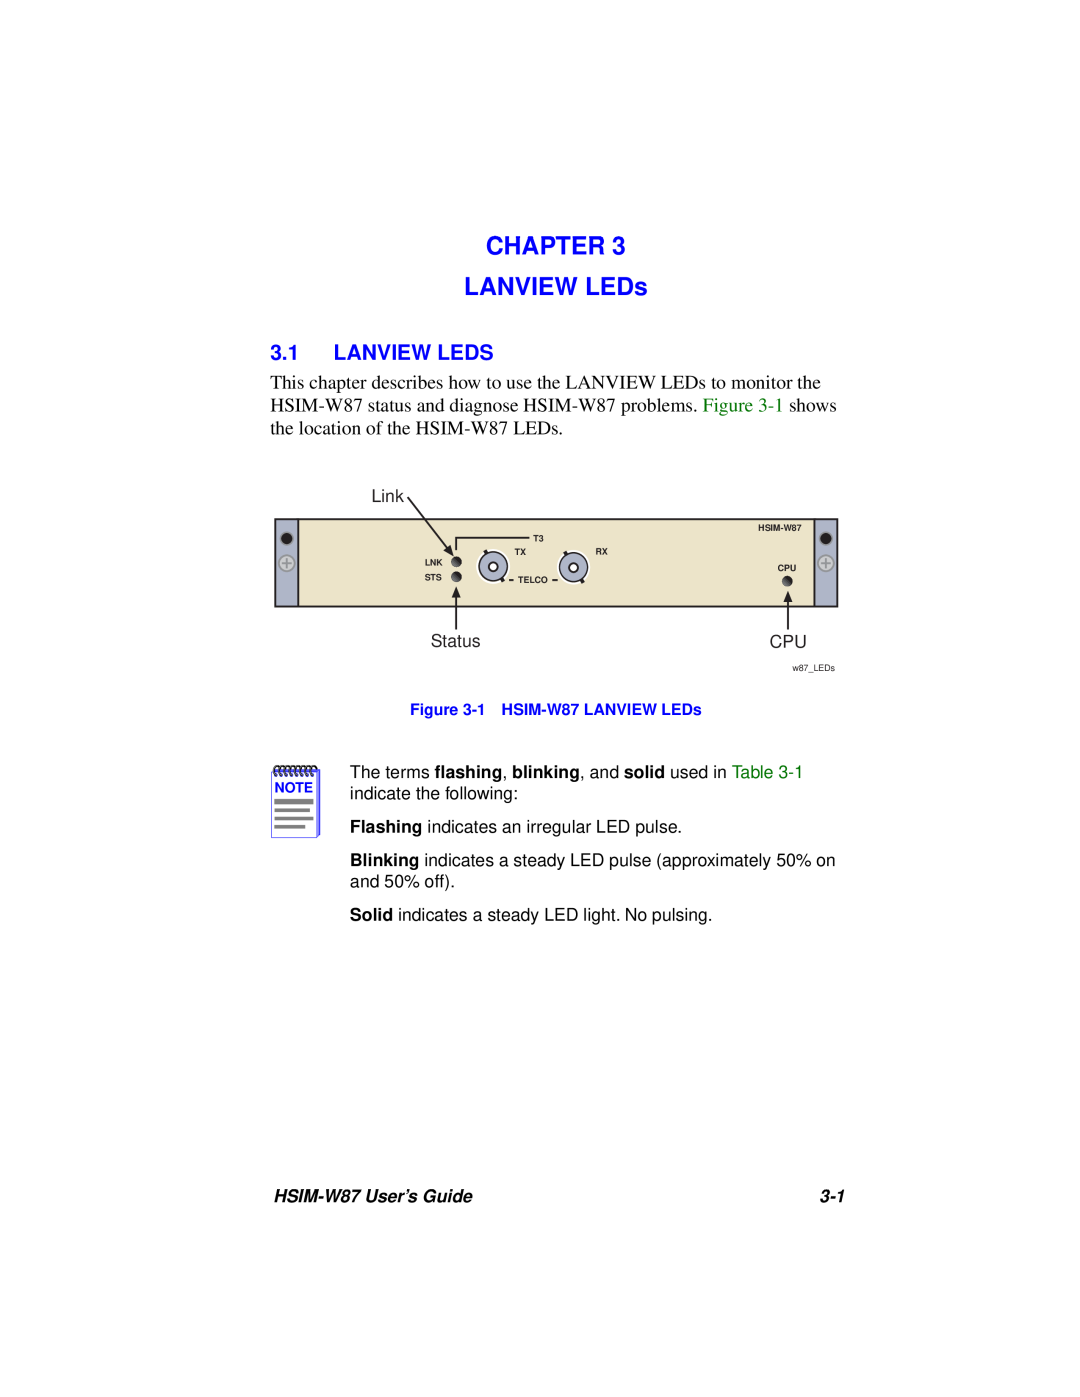 Cabletron Systems manual CHAPTER LANVIEW LEDs, Lanview Leds, HSIM-W87 User’s Guide 